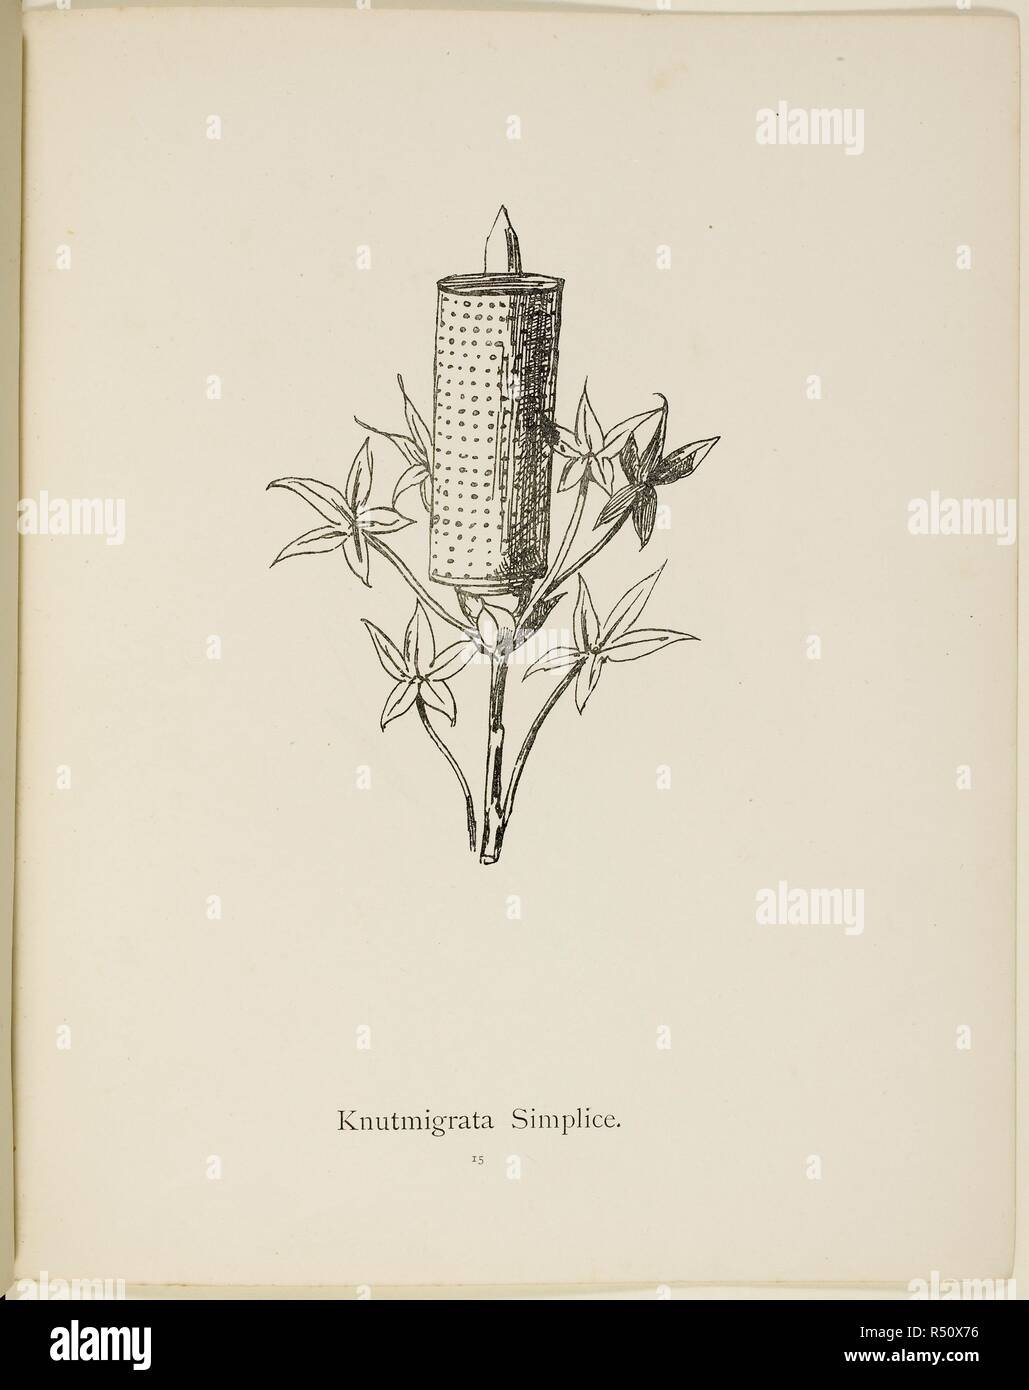 Fictional plant: 'Knutmigrata Simplice'  Illustration from Nonsense Botany by Edward Lear, published in 1889. . Nonsense Botany, and Nonsense Alphabets, Fifth edition. Frederick Warne & Co.: London & New York, 1889. Source: Cup.400.a.42 15. Language: English. Stock Photo